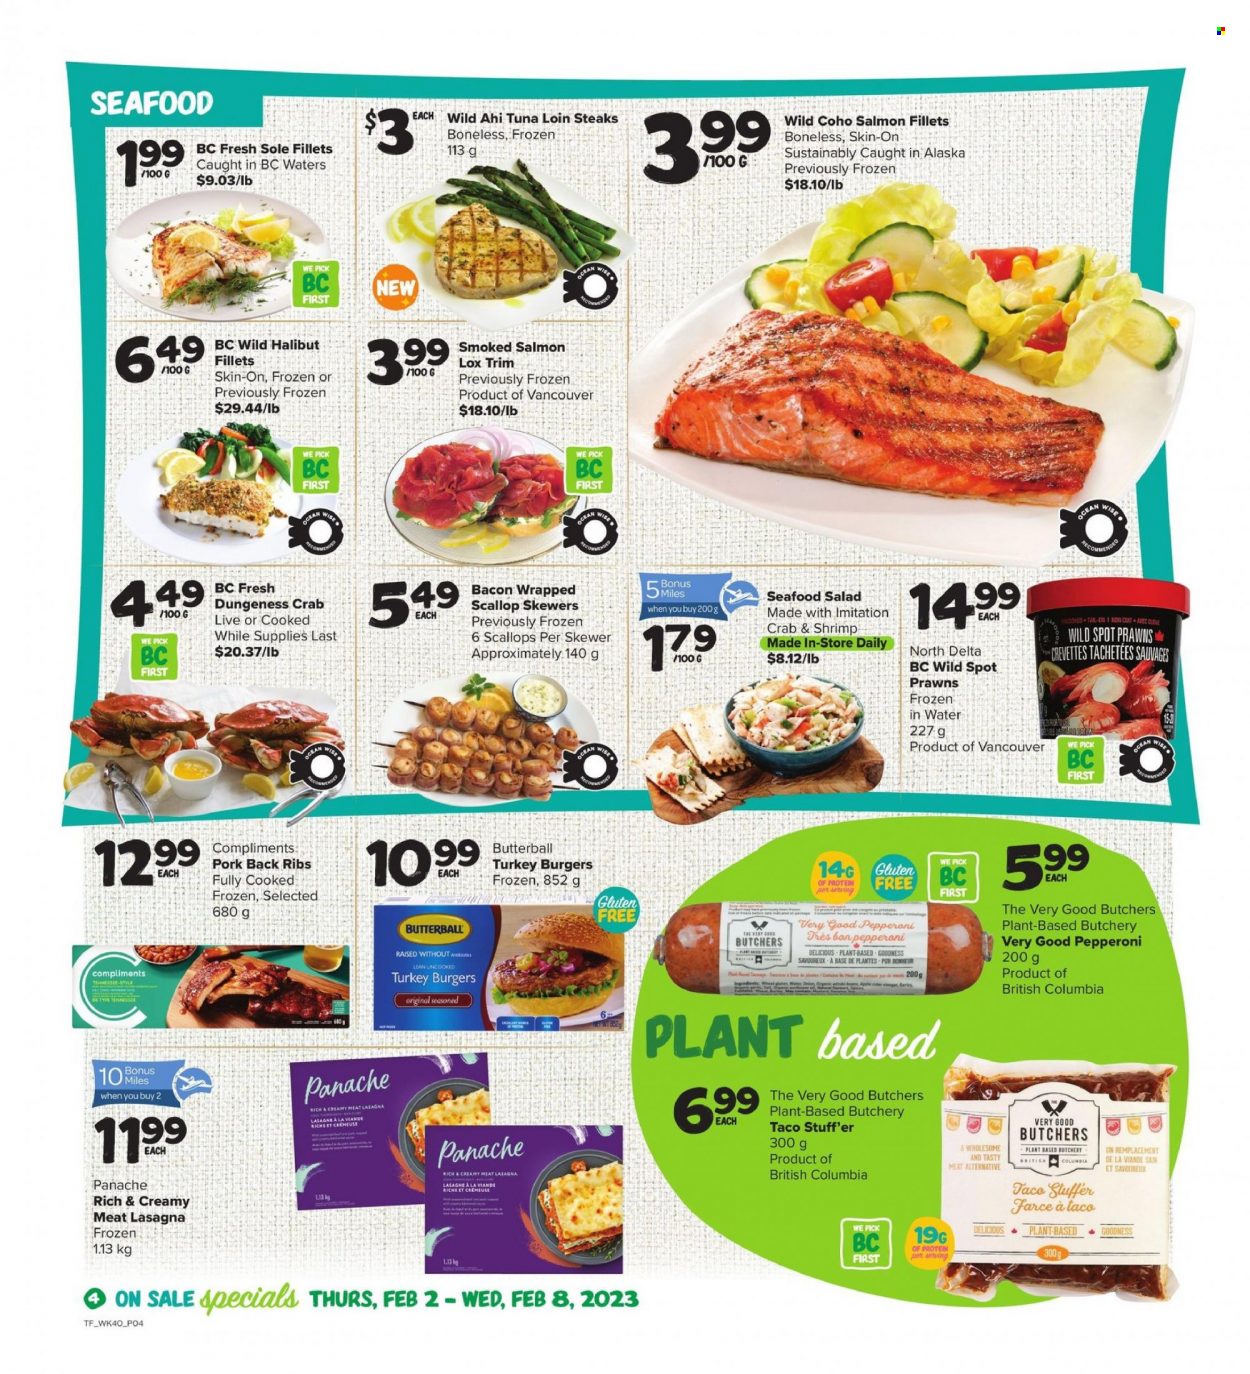 thumbnail - Thrifty Foods Flyer - February 02, 2023 - February 08, 2023 - Sales products - salmon, salmon fillet, scallops, smoked salmon, tuna, halibut, seafood, prawns, crab, shrimps, hamburger, lasagna meal, bacon, Butterball, pepperoni, seafood salad, apple cider, cider, ribs, turkey burger, pork meat, pork ribs, pork back ribs, steak. Page 4.